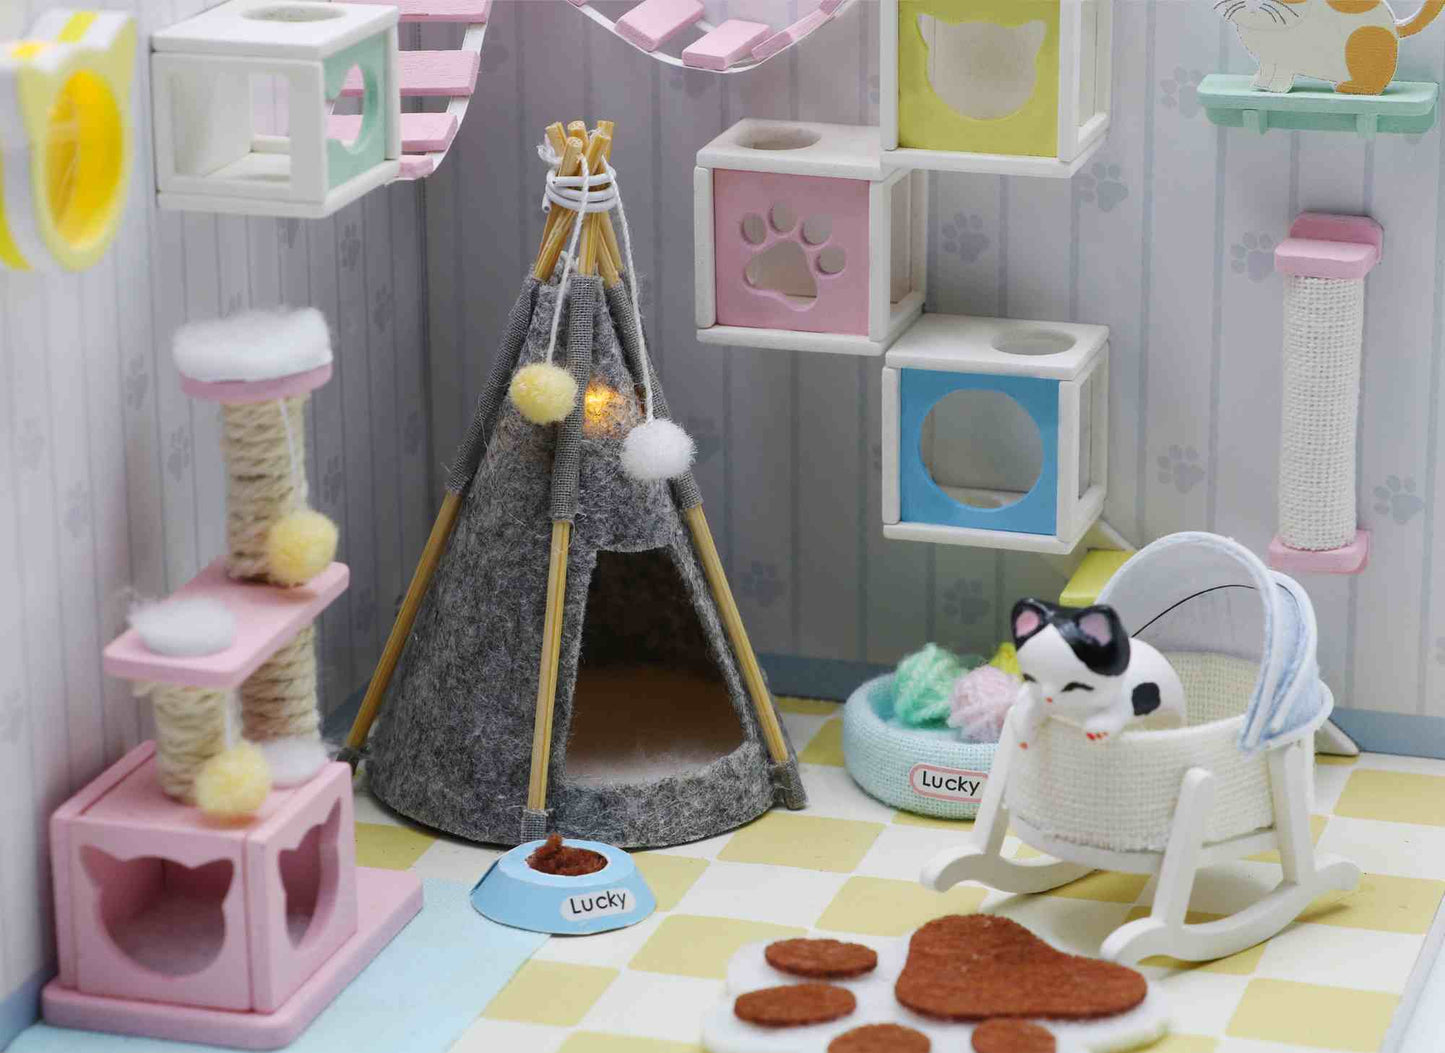 DIY Wooden Miniature "Meow's Home" (S2009) Doll house toy w/ LEDs, Glue and Dust Cover Birthday Gift